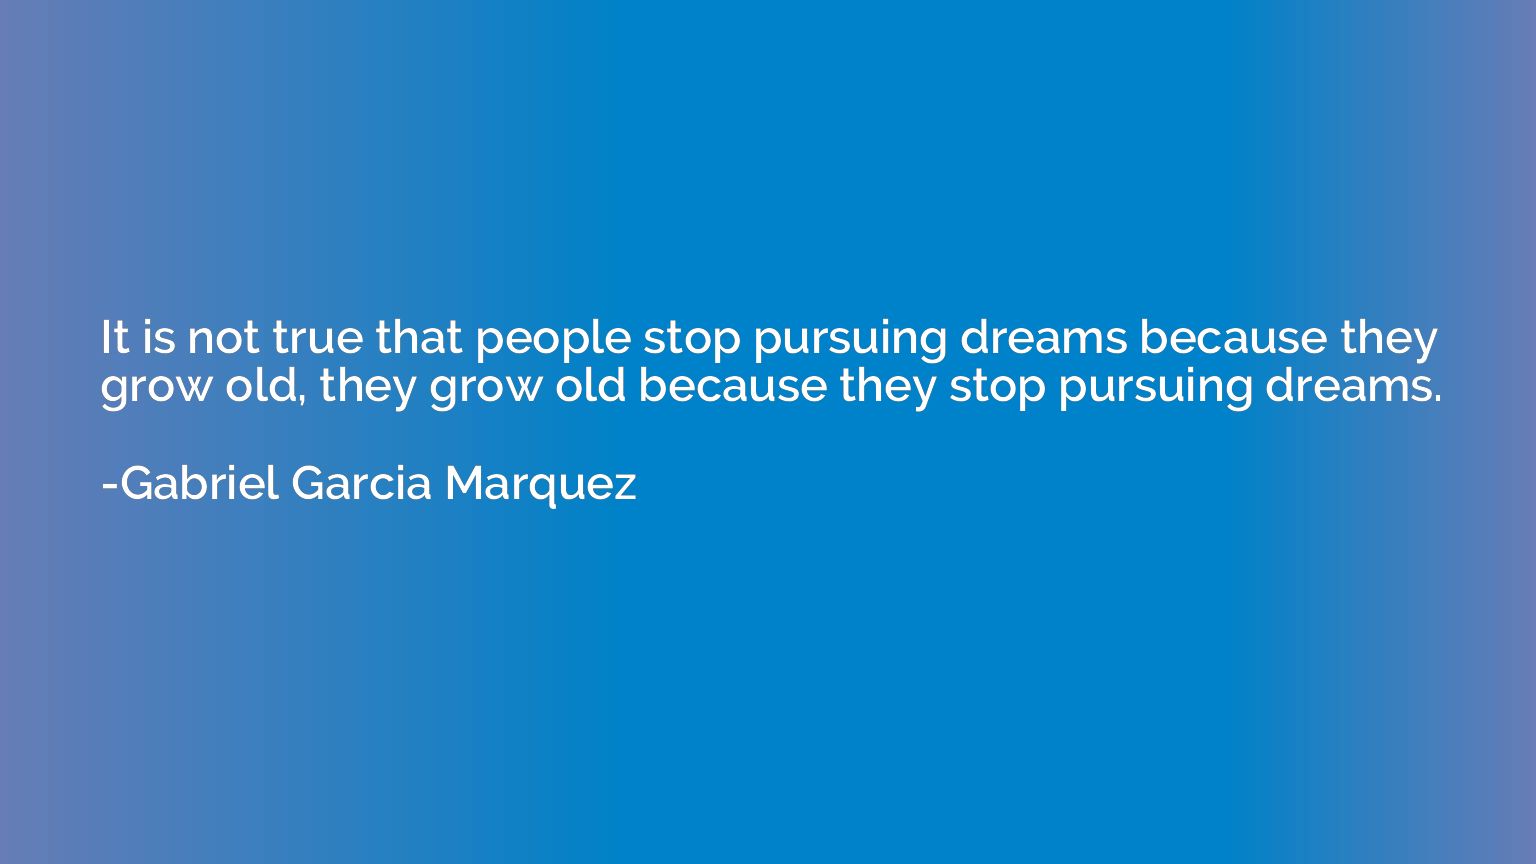 It is not true that people stop pursuing dreams because they